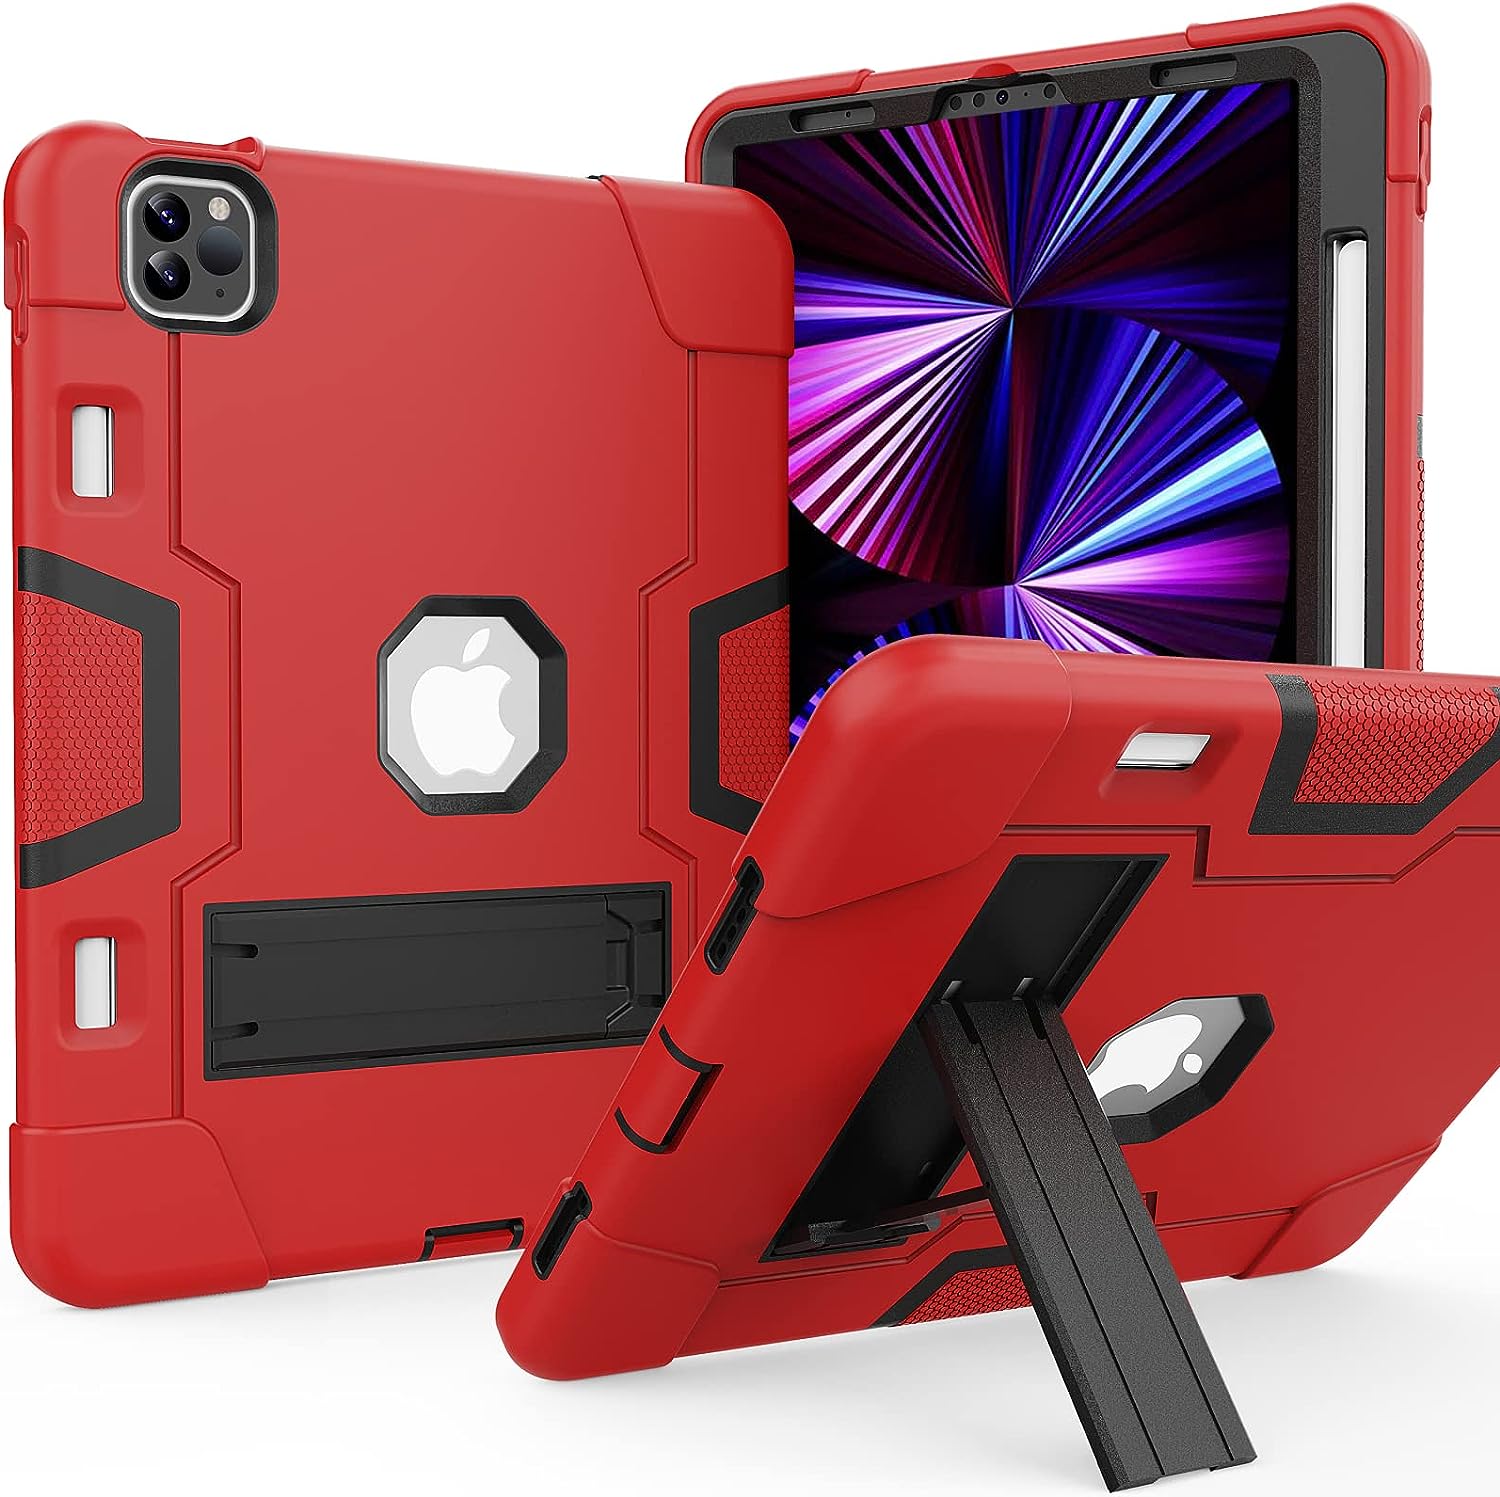 iPad Mini 6th Gen 8.3 inch 2021 Red & Black Case with Kickstand RRP £10.83 CLEARANCE XL £7.99